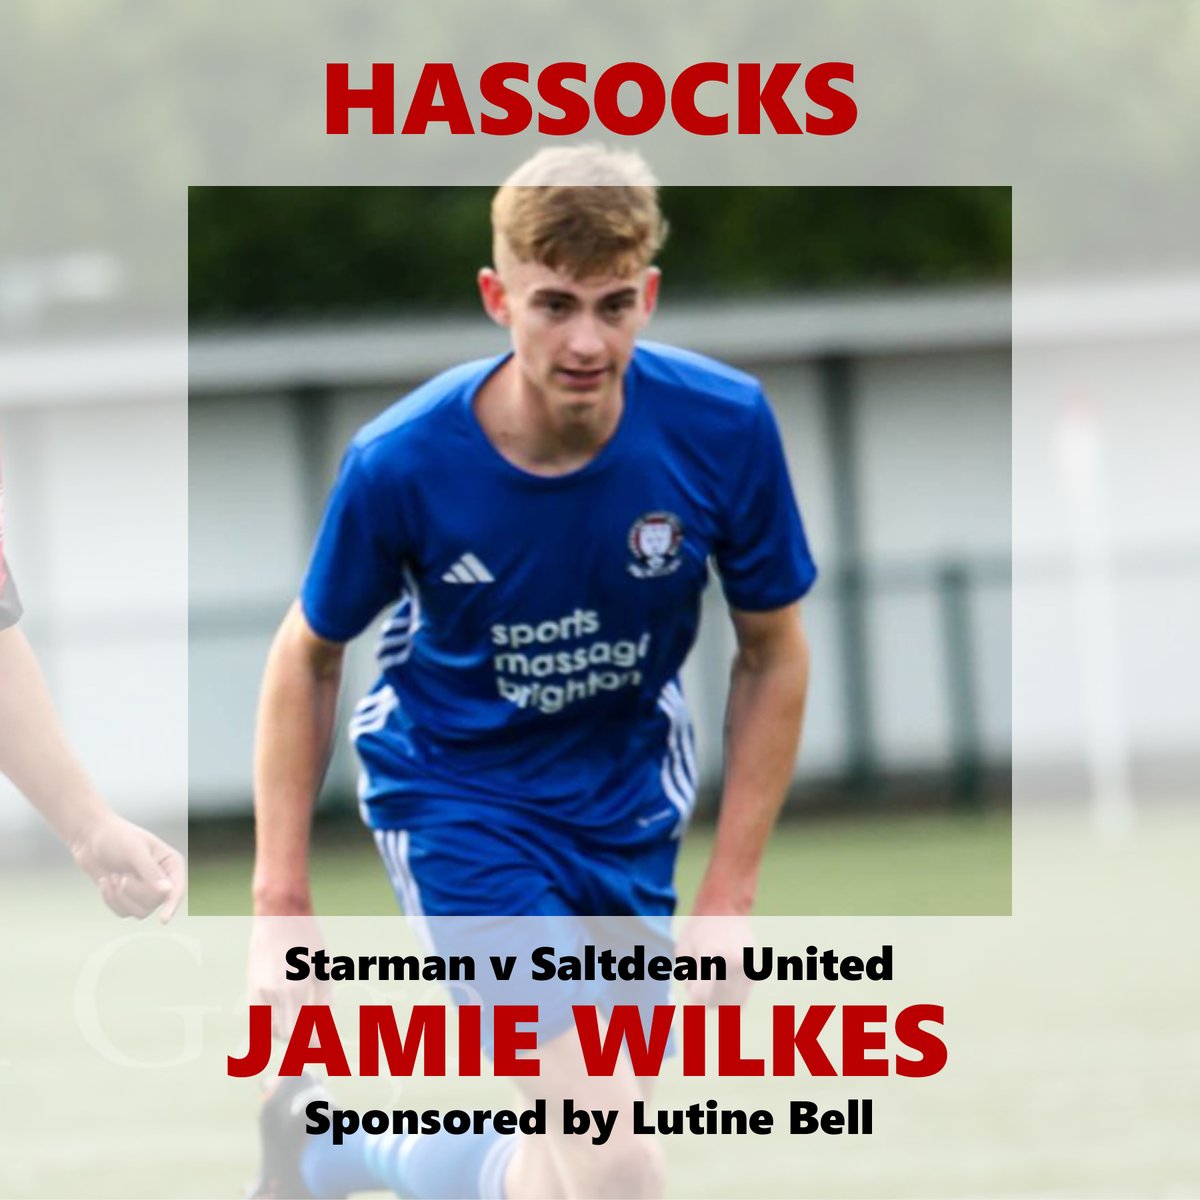 Not a great day at the office on Saturday, but tall striker Jamie Wilkes was the Robins Starman in defeat at Saltdean United #UTR